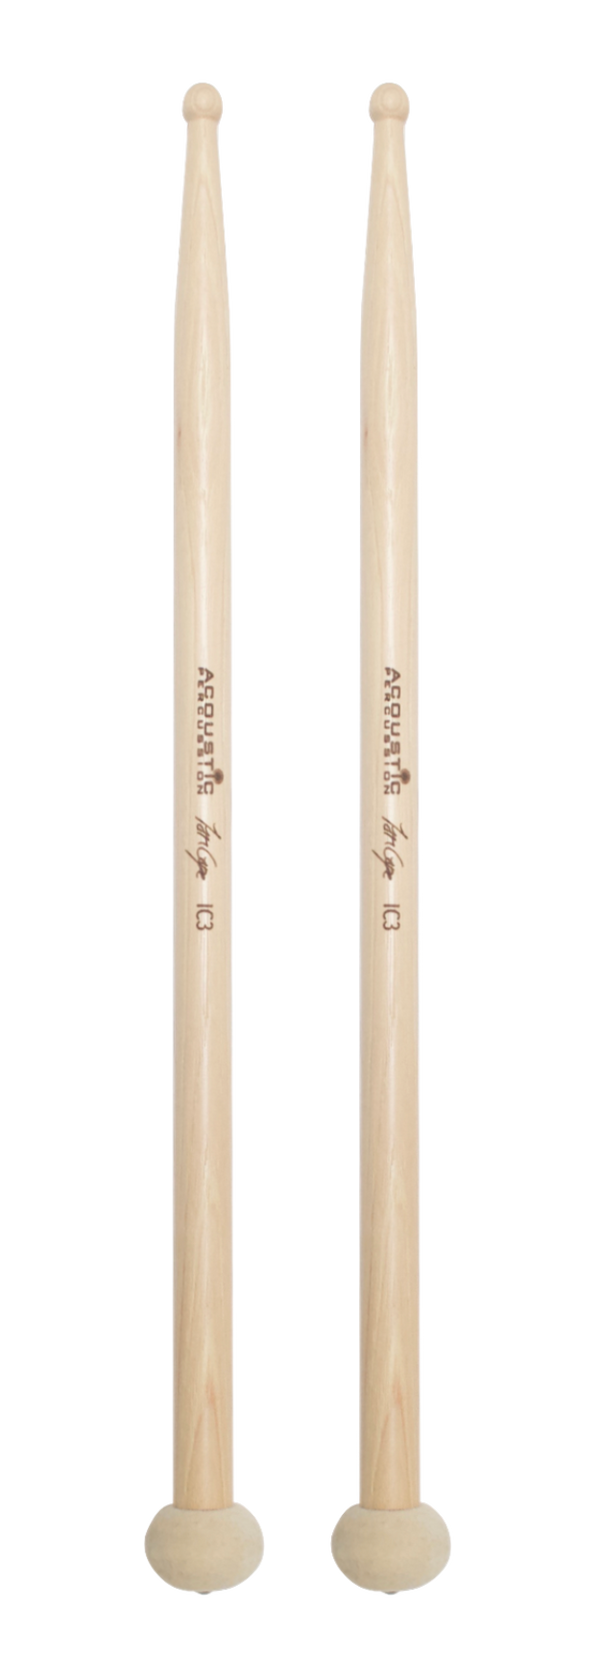 Acoustic Percussion IC3 double ended Timpani/snare drum sticks